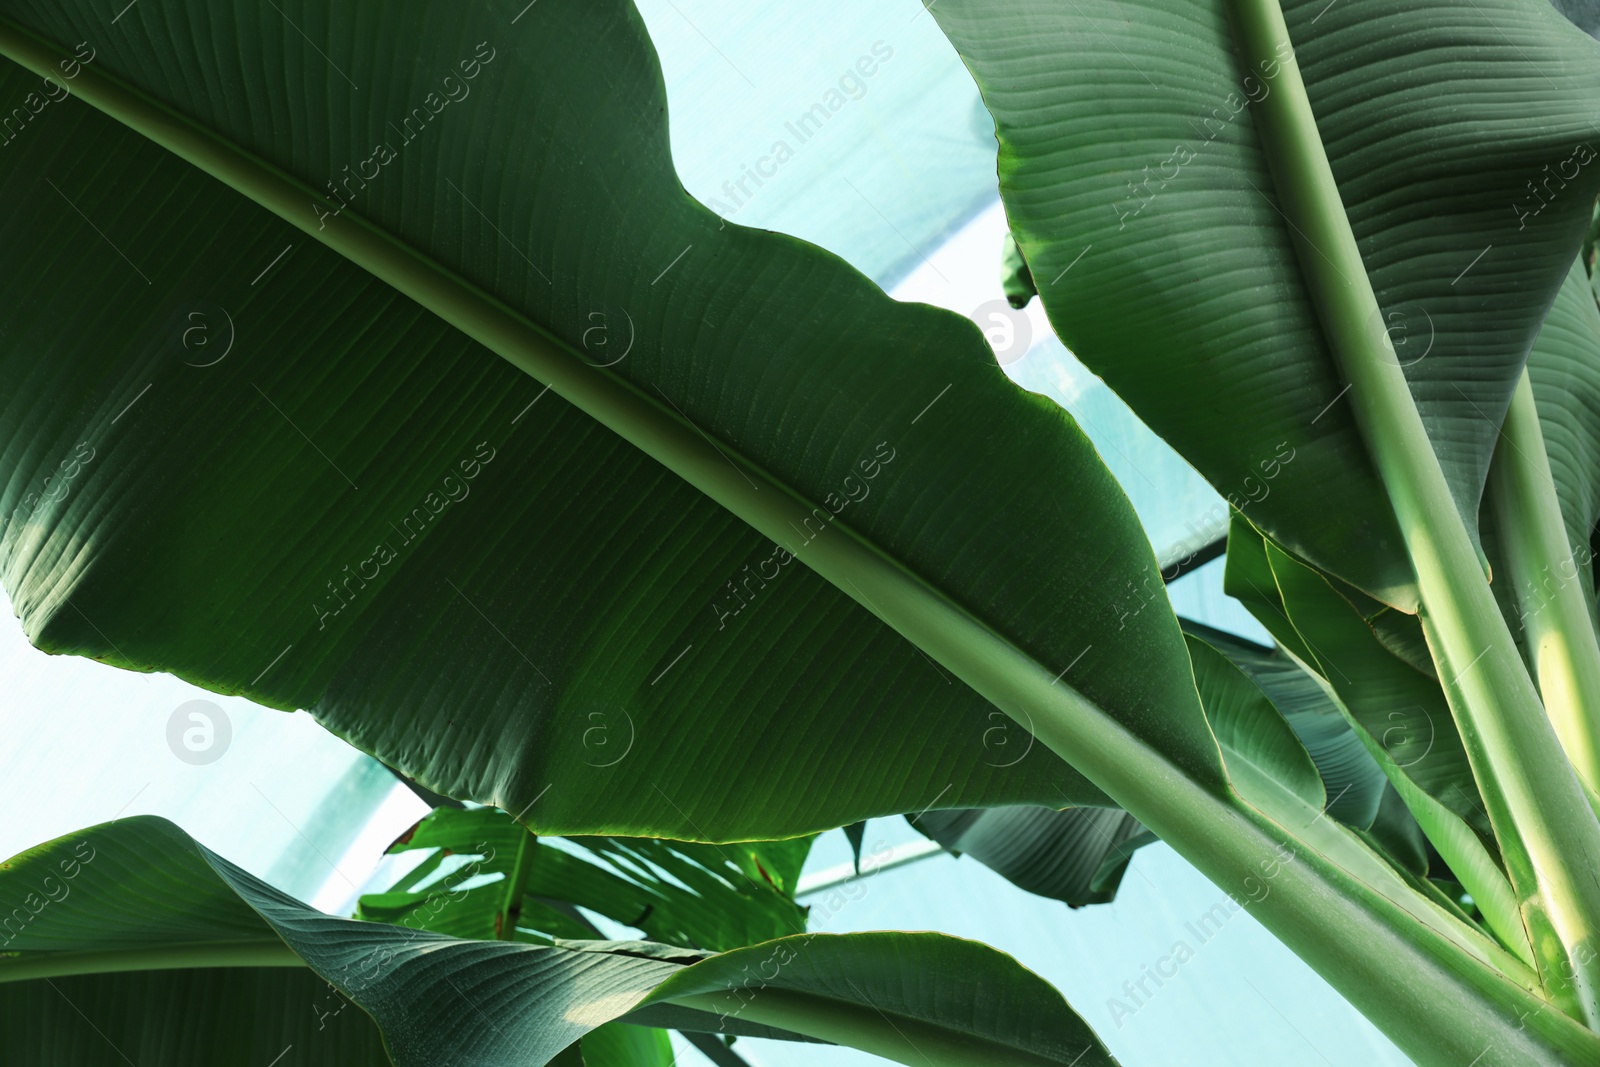 Photo of Banana tree with green leaves growing outdoors, low angle view